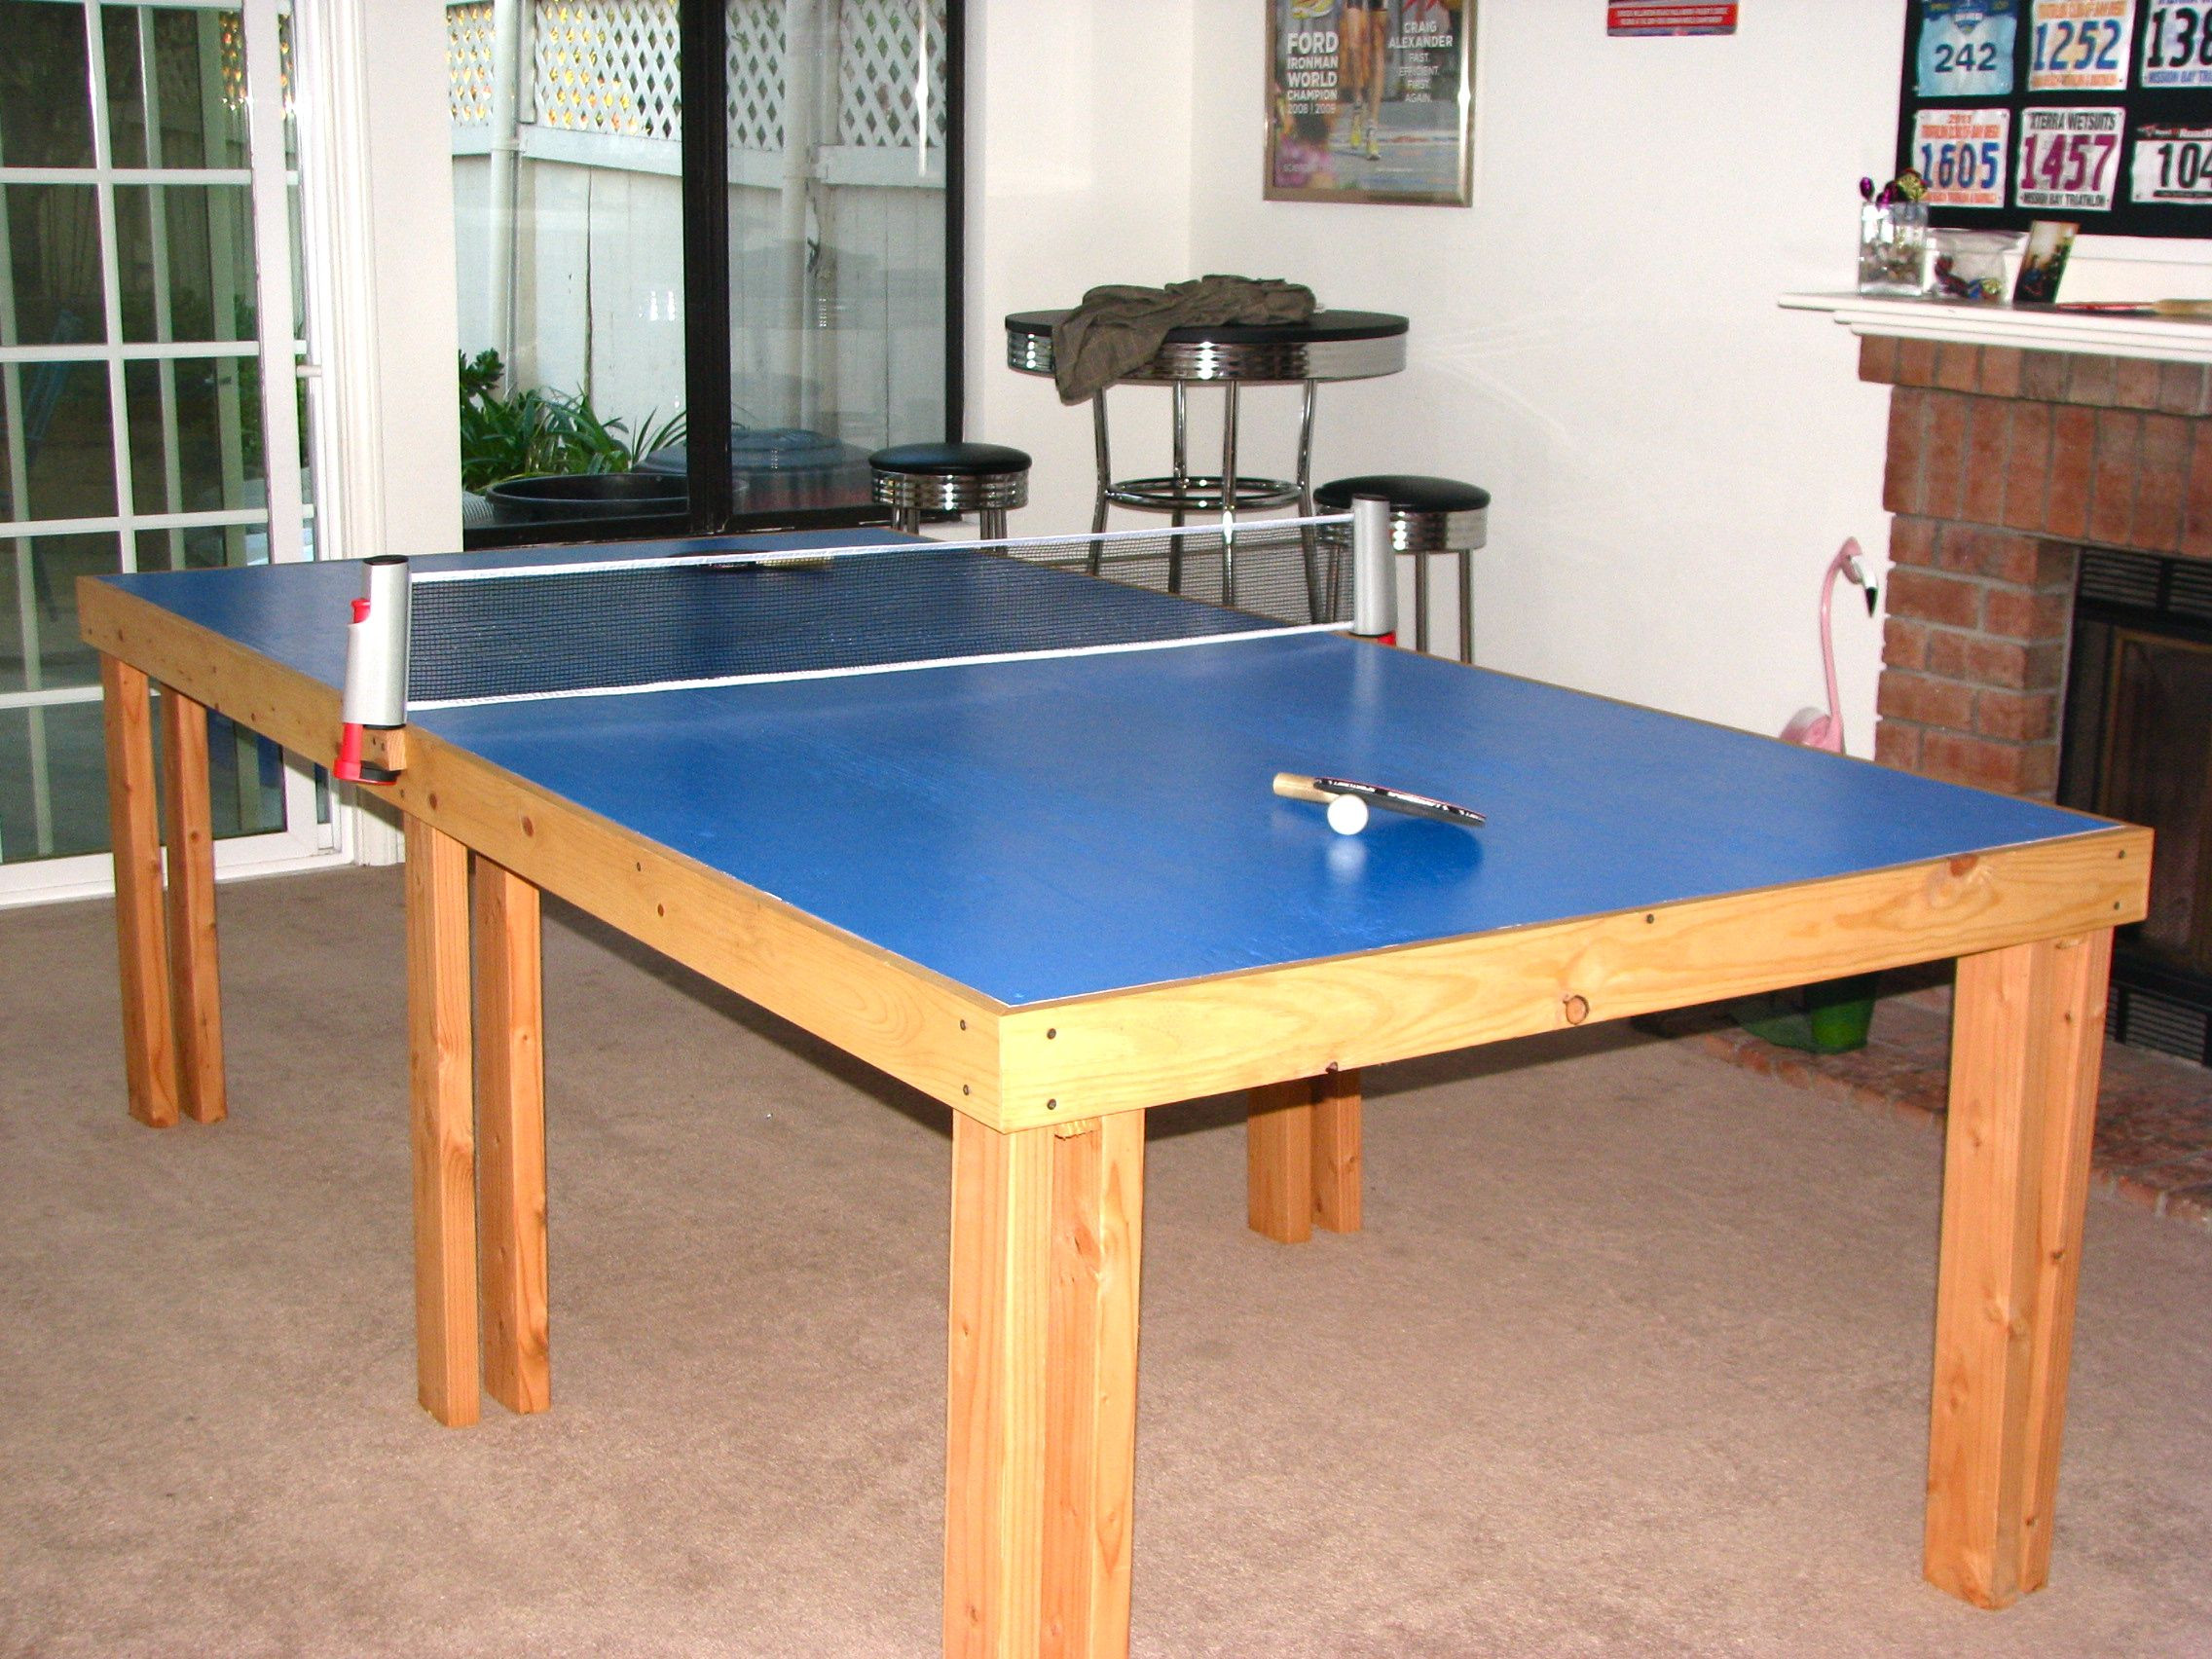 DIY Outdoor Ping Pong Table
 Our homemade ping pong table Spent less than 120 for all